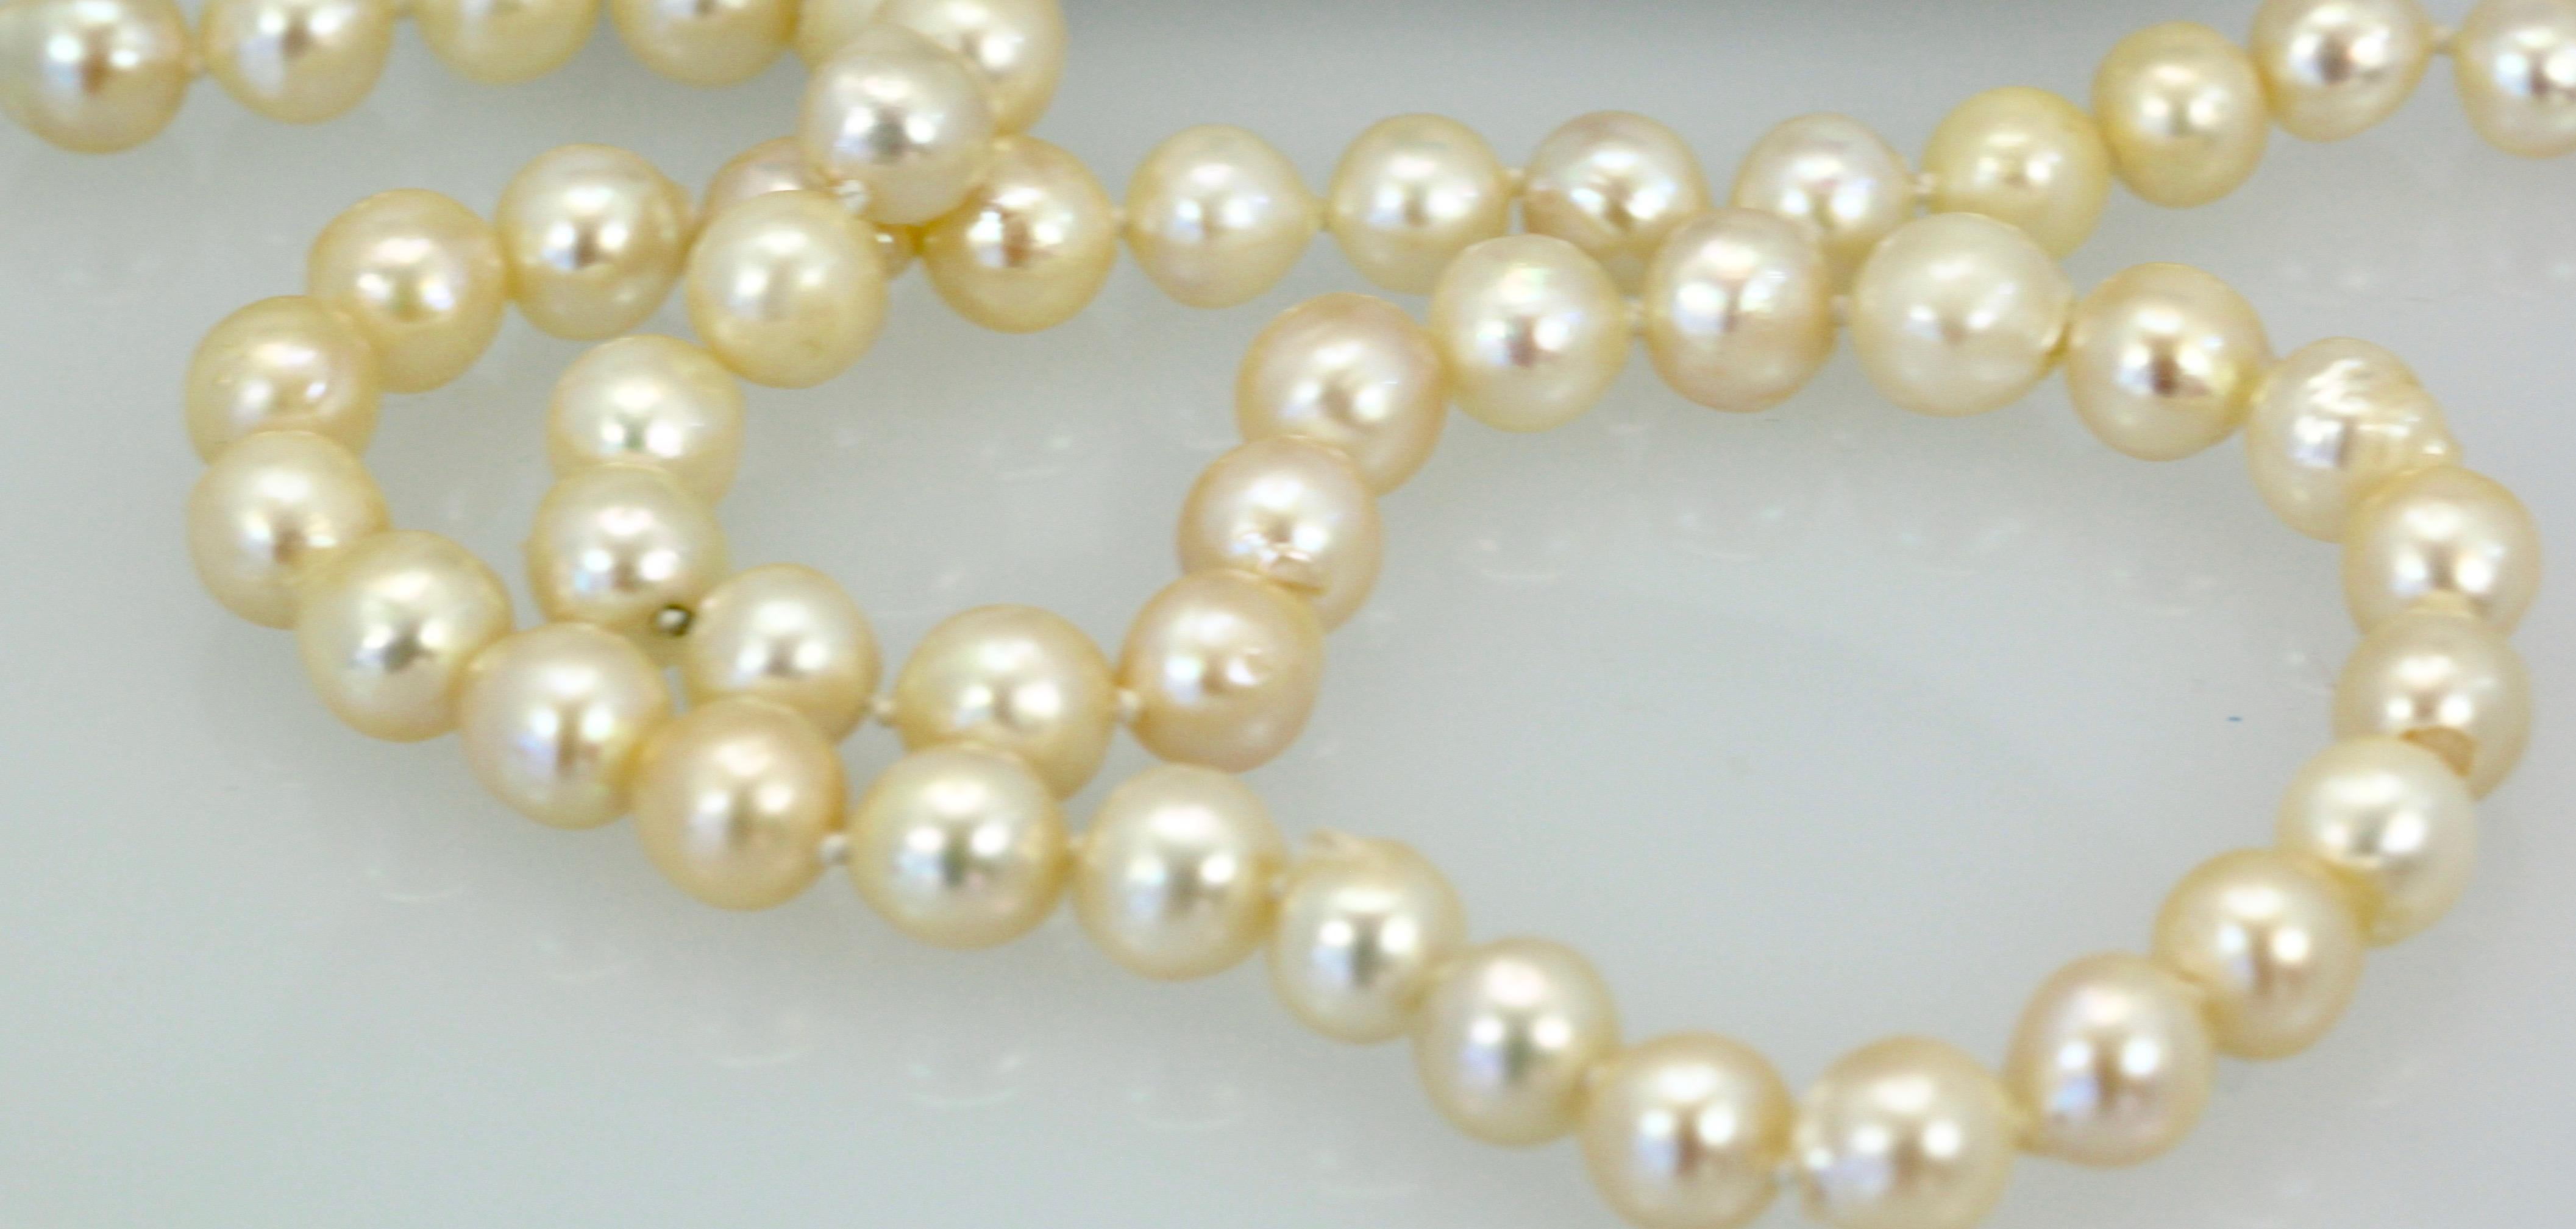 This Freshwater Pearl Necklace is 43